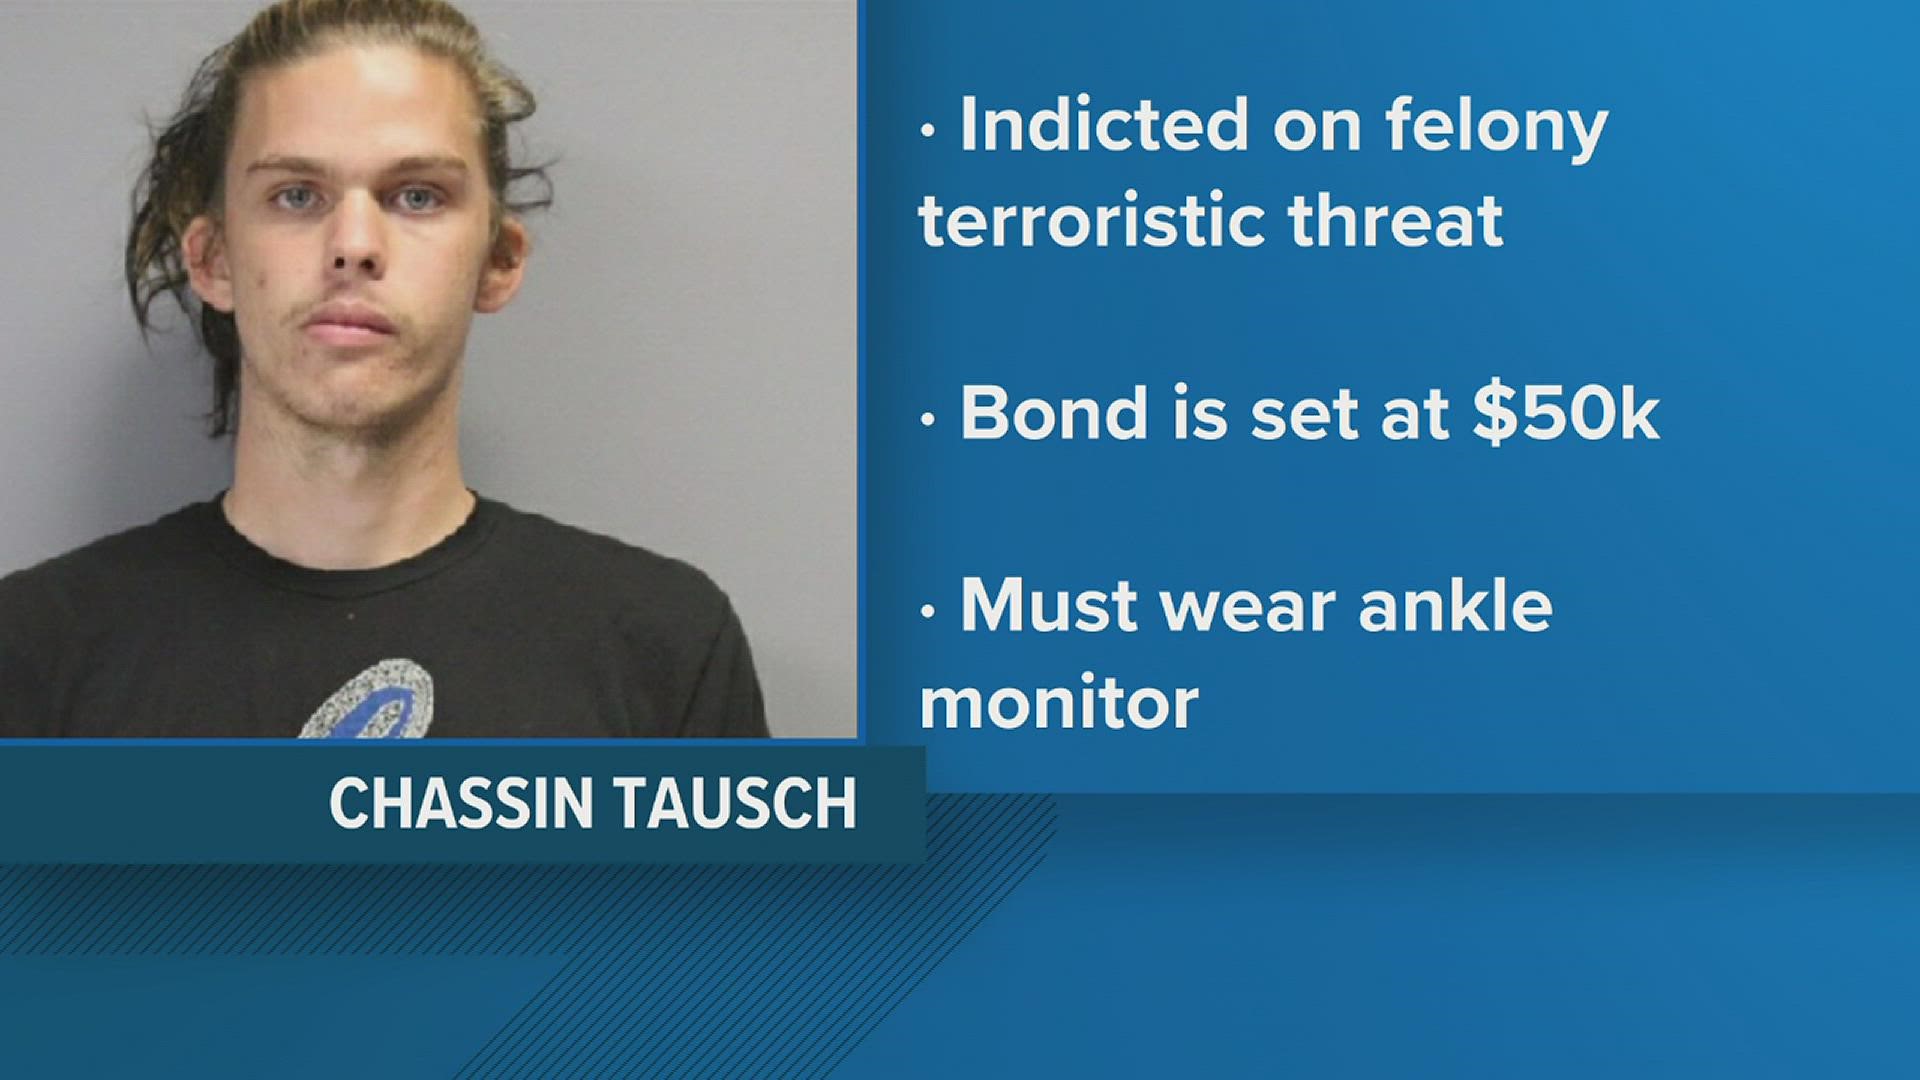 Deputies saw a video that they said showed Chassin Tausch appearing to mimic pointing a rifle toward other students.